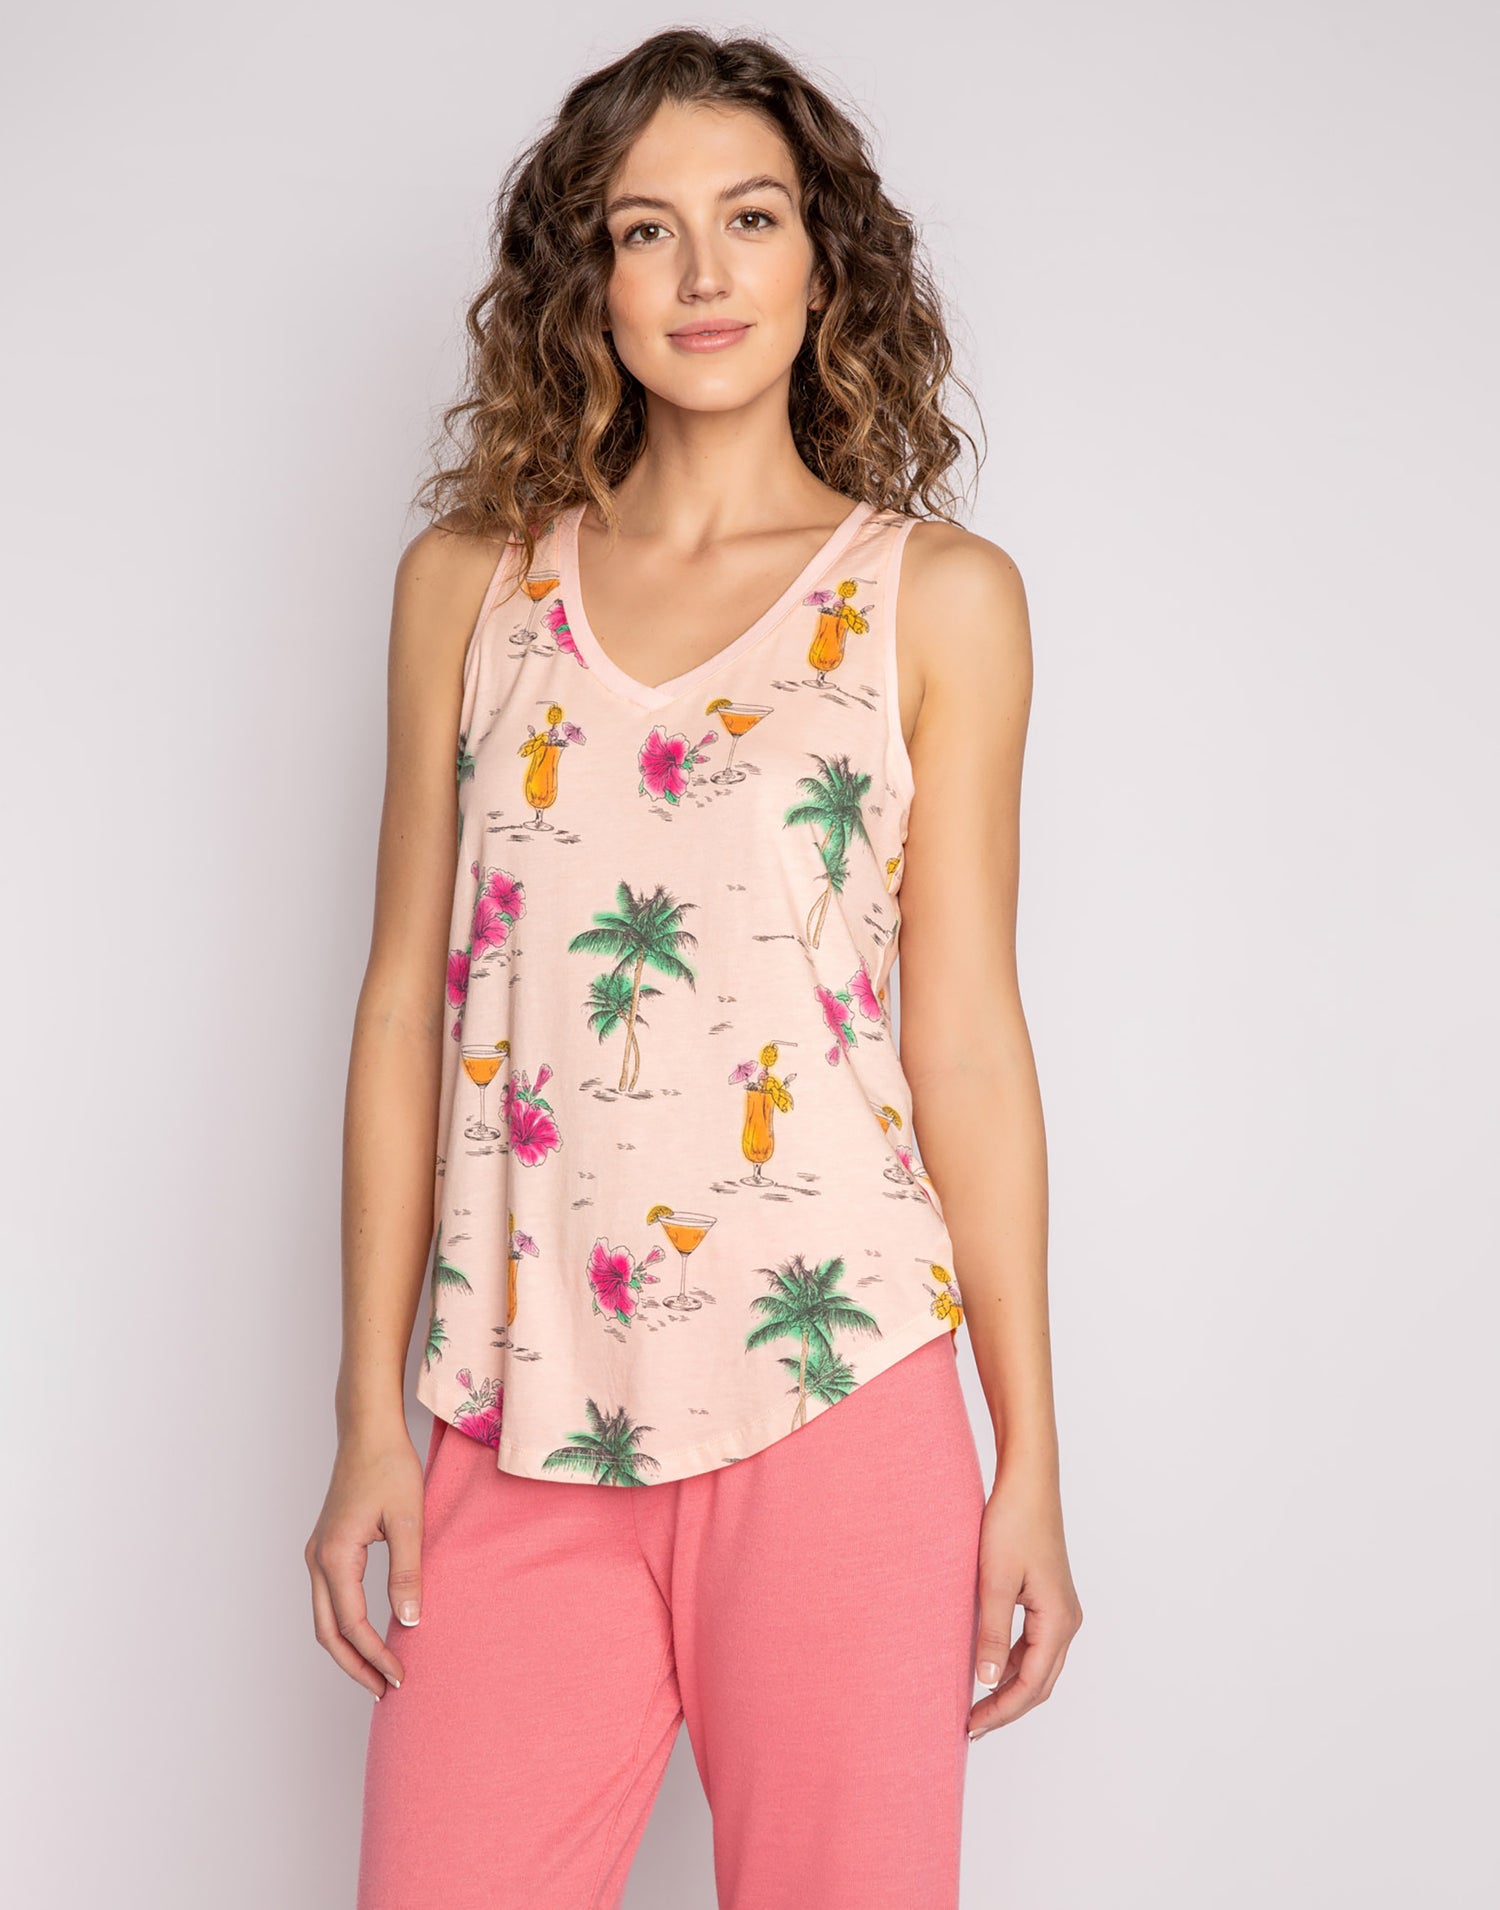 Playful Prints Tank by P.J. Salvage in Pink Dream - Front View